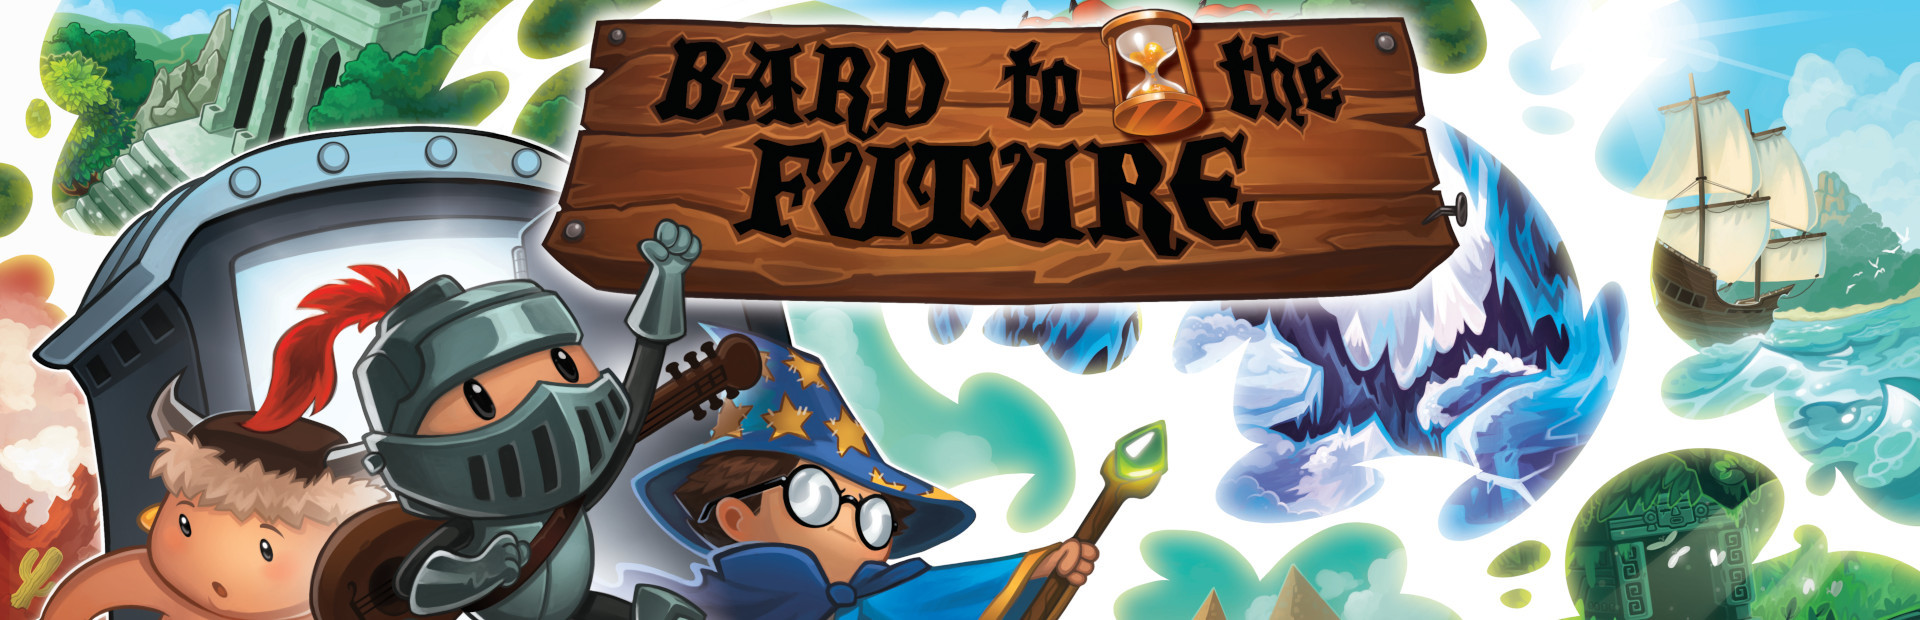 Bard to the Future cover image